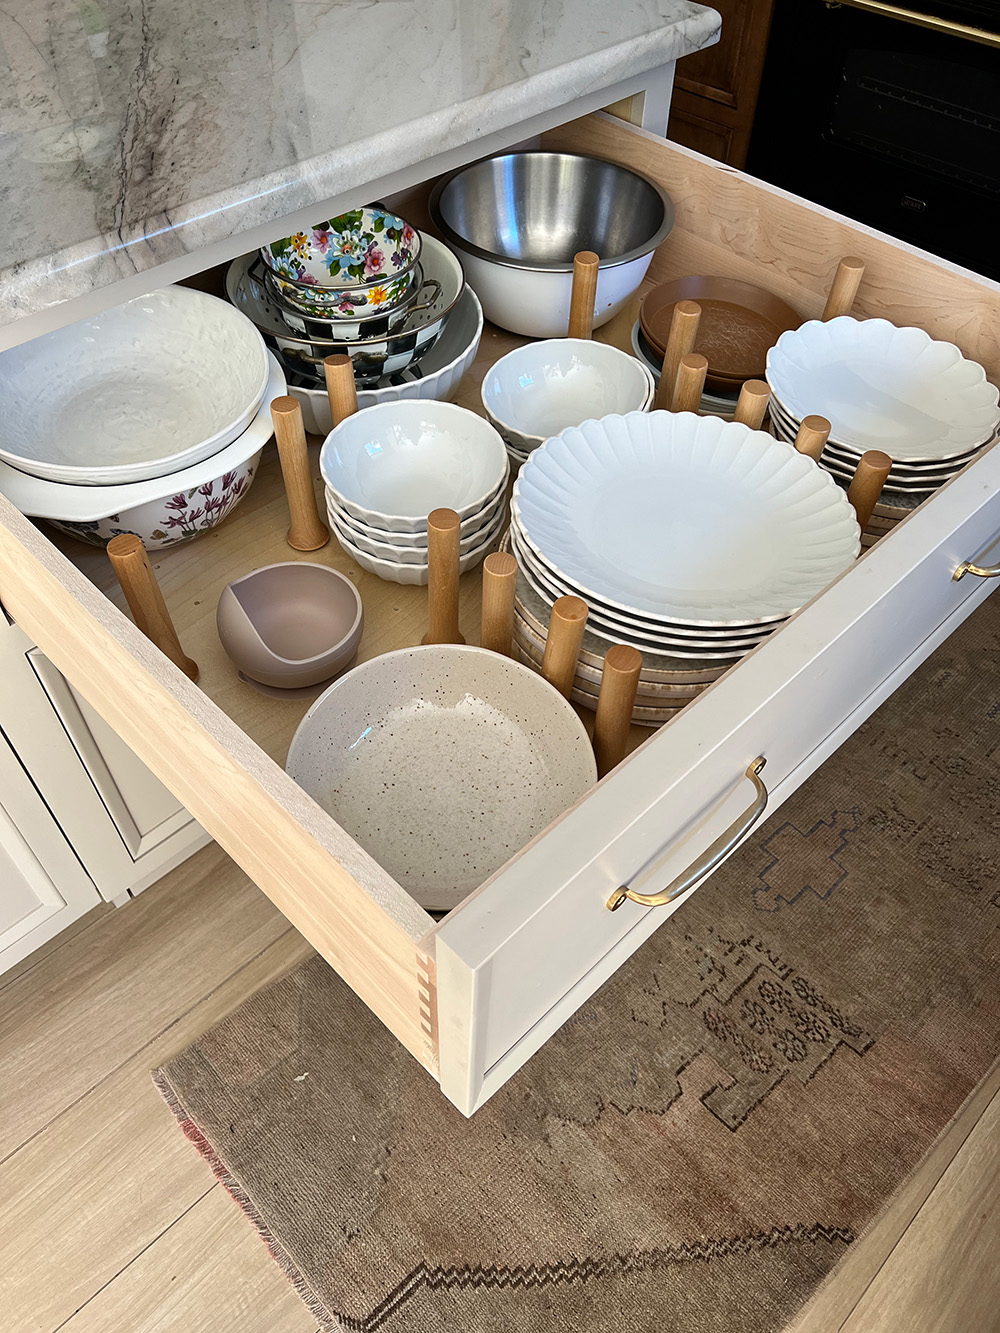 Drawer Storage for Dishes and Bowls